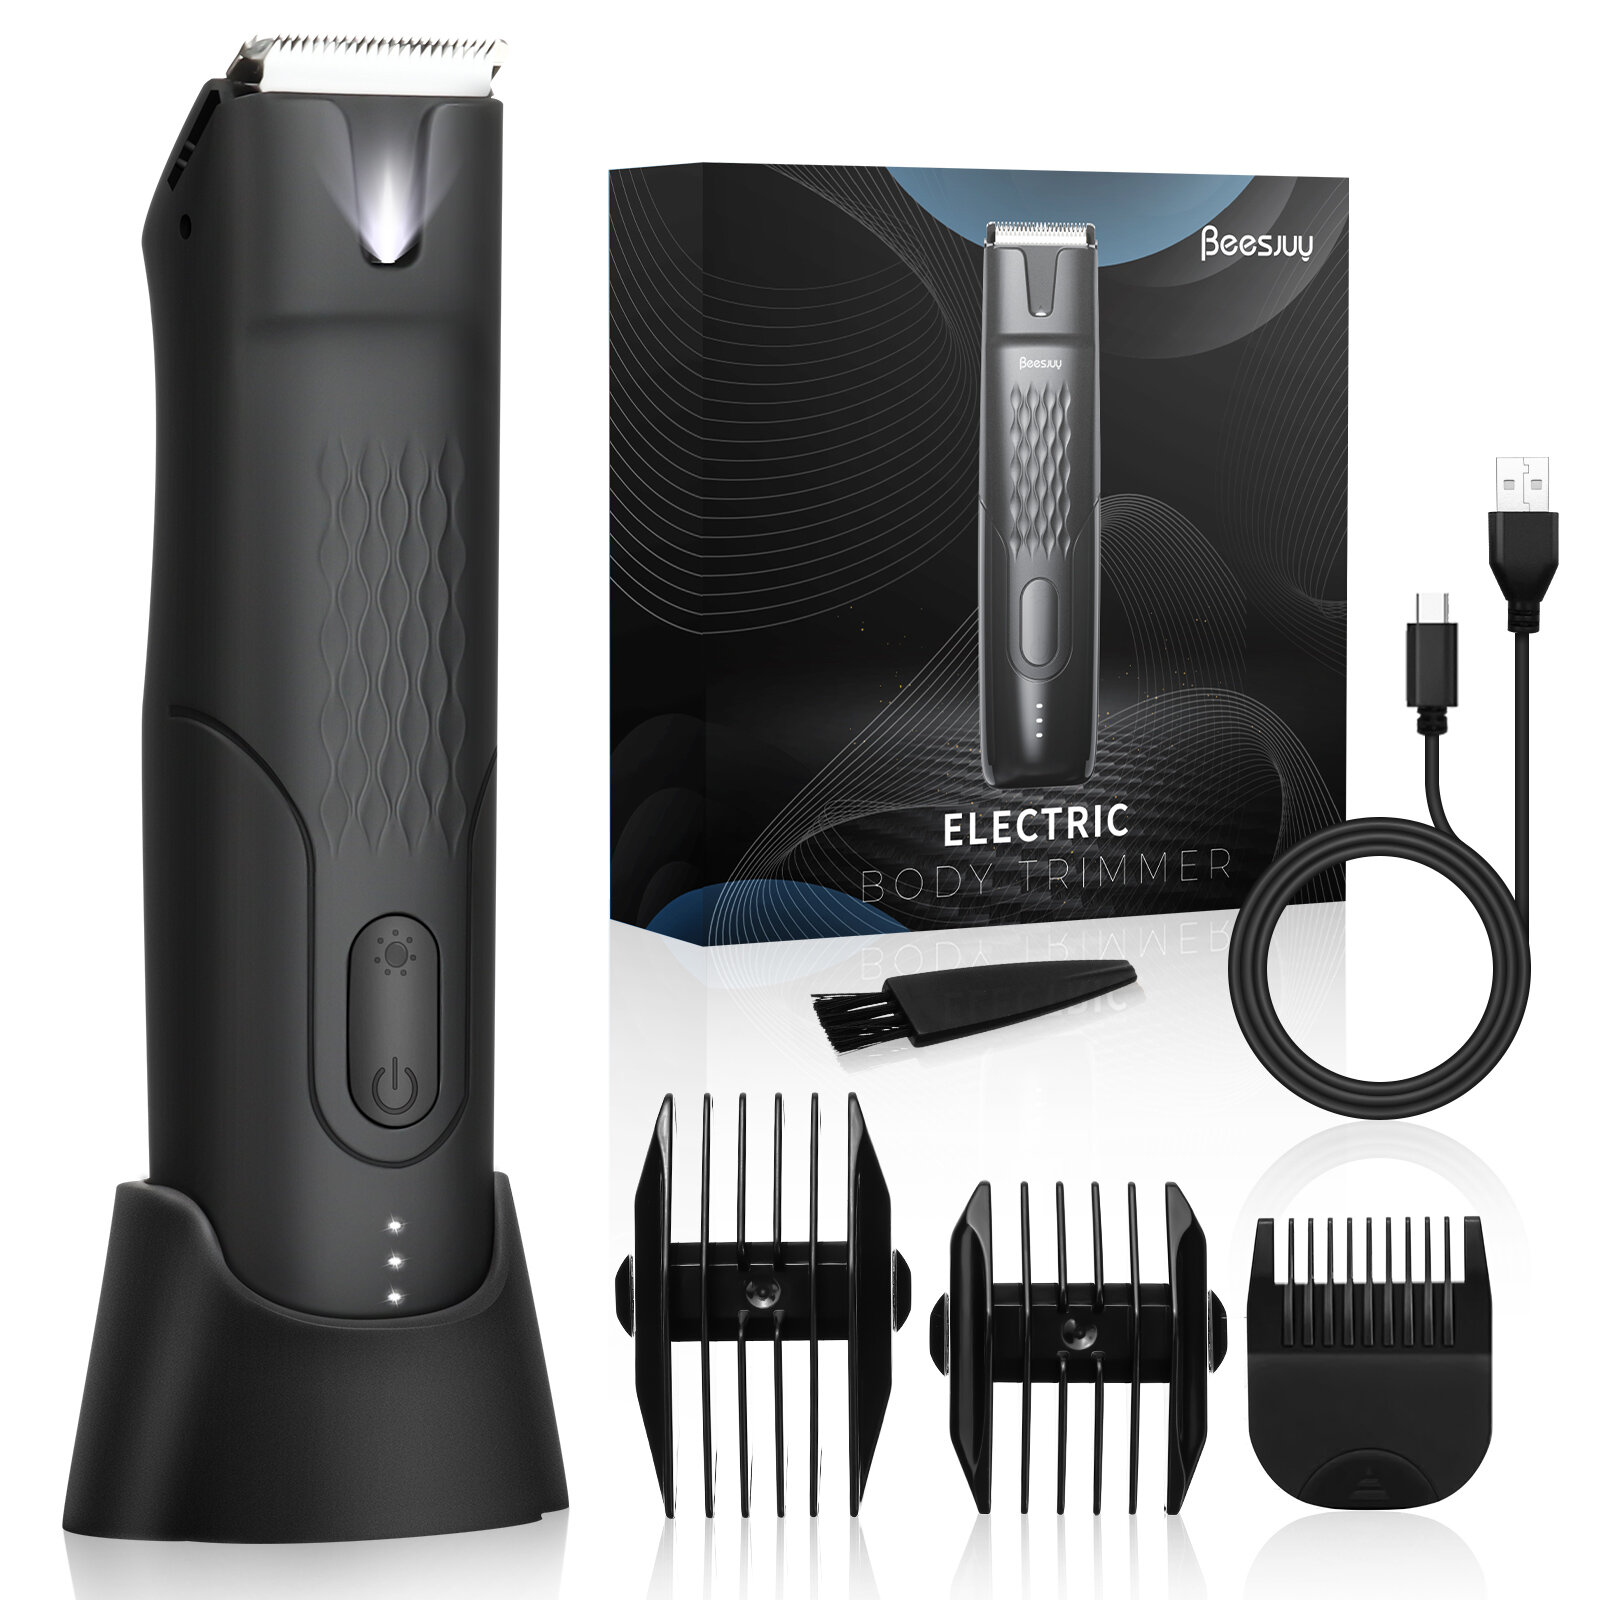 best price,beesjuy,electric,body,hair,clipper,discount